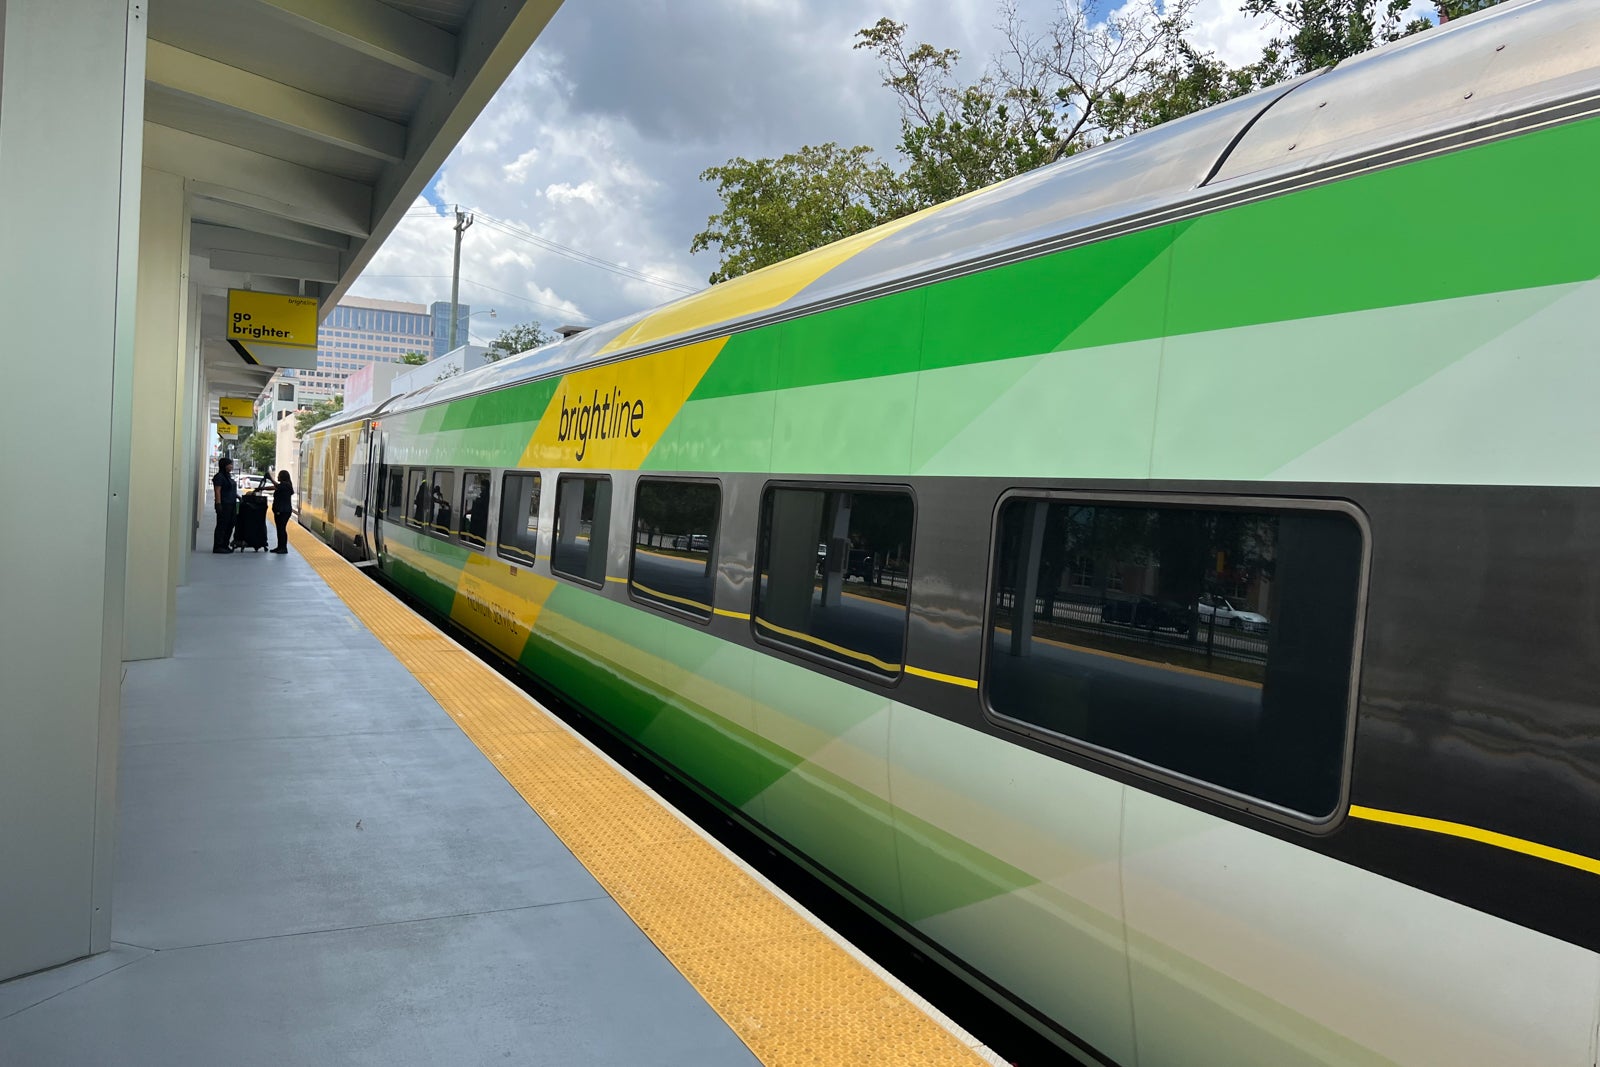 You are currently viewing Deal alert: Tickets for new high-speed train from Miami to Orlando